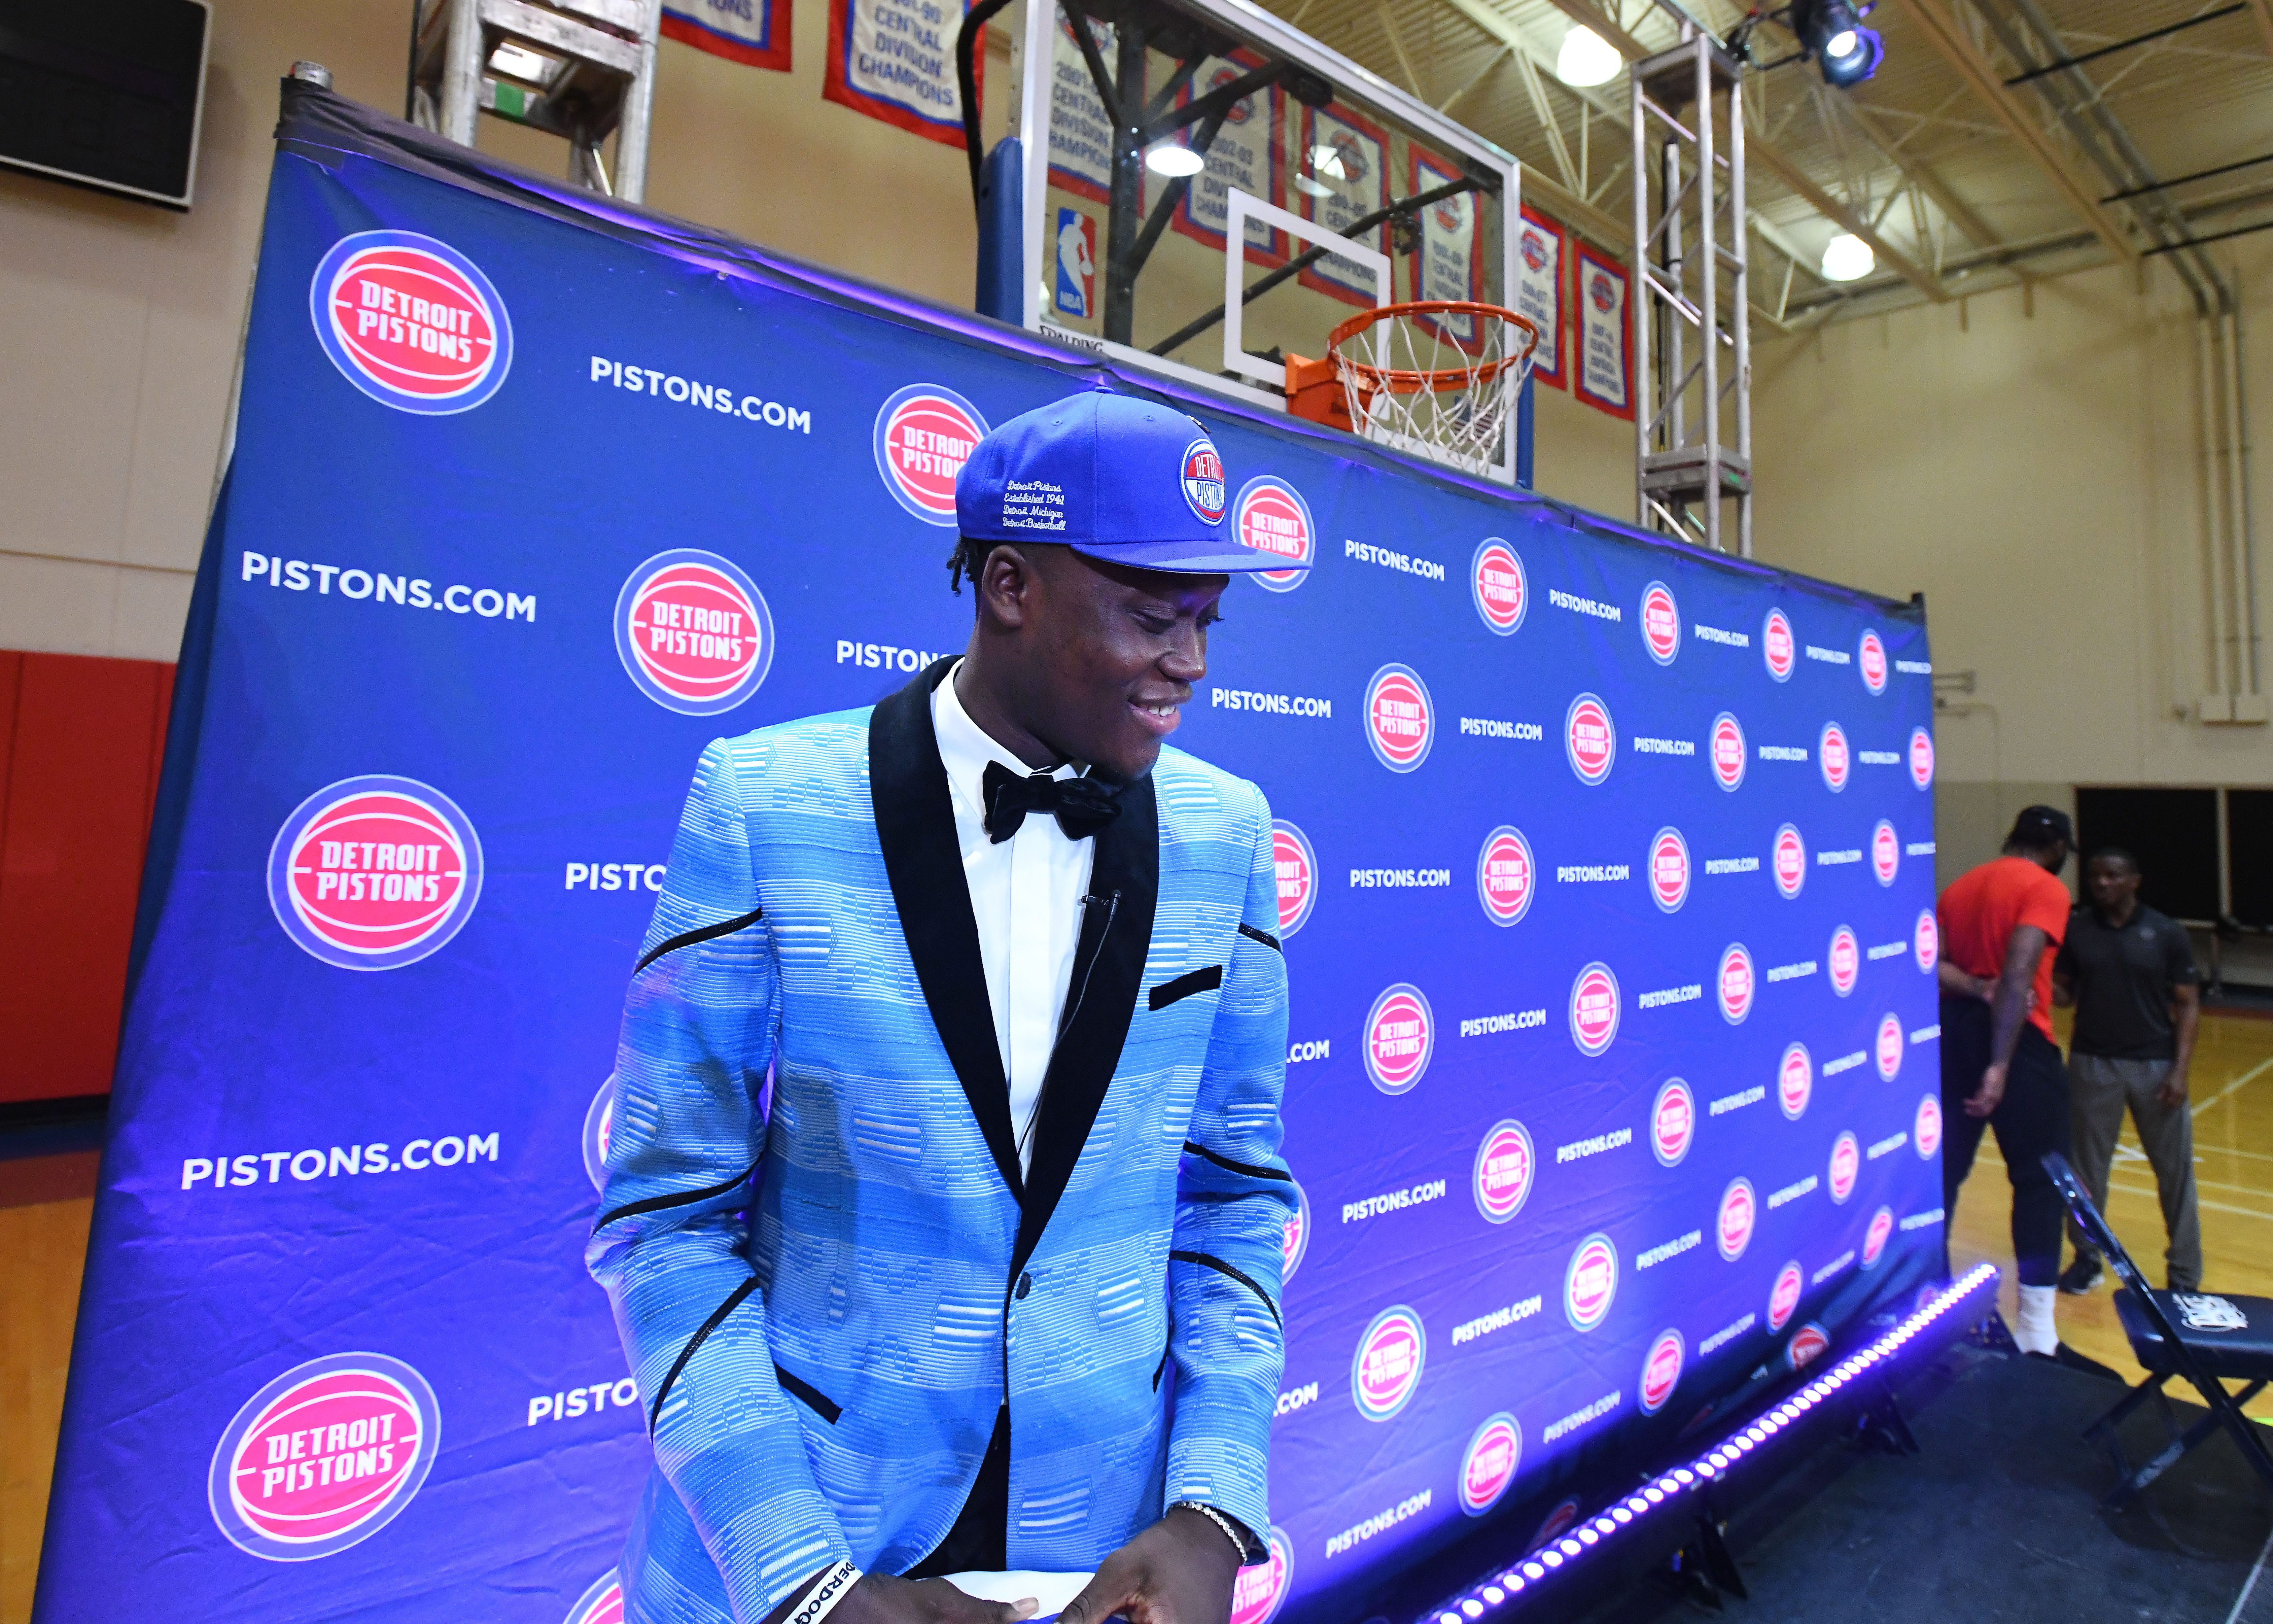 Pistons first round draft pick Sekou Doubouya after the introductory press conference.